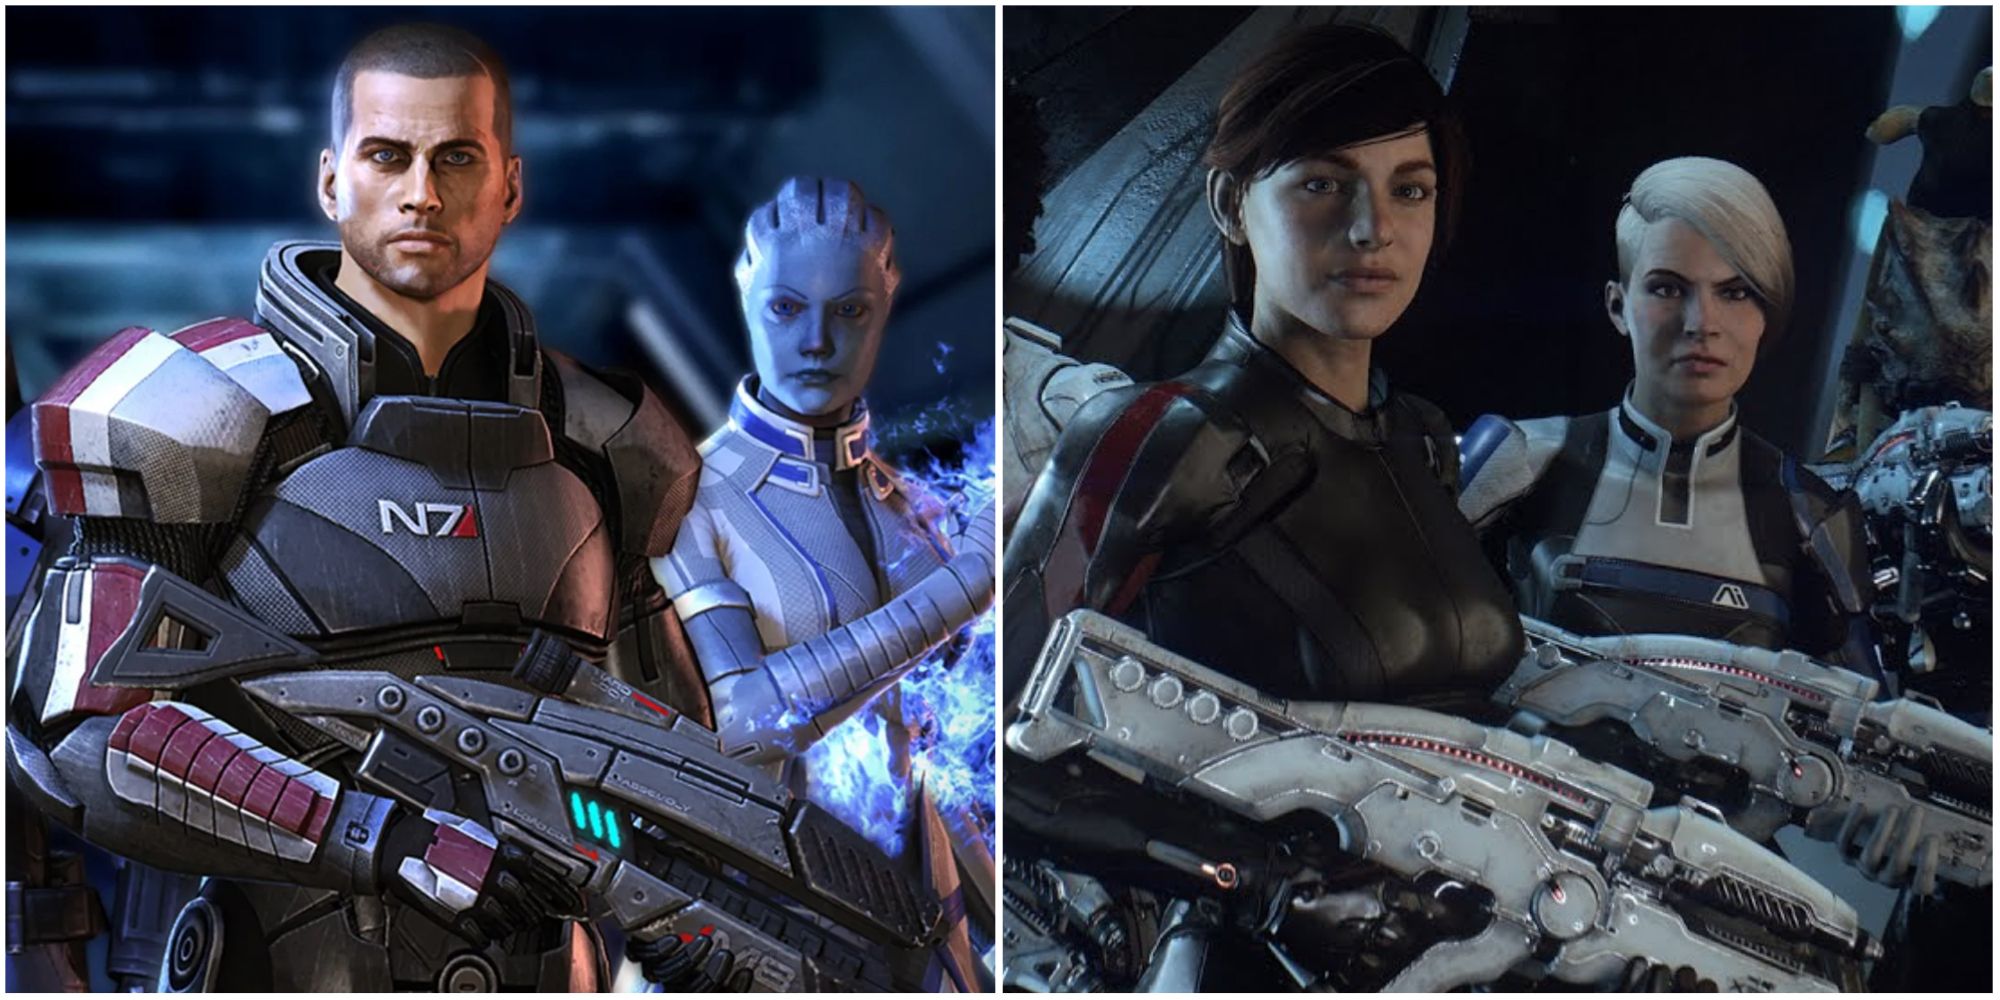 Mass Effect 3 and Mass Effect: Andromeda